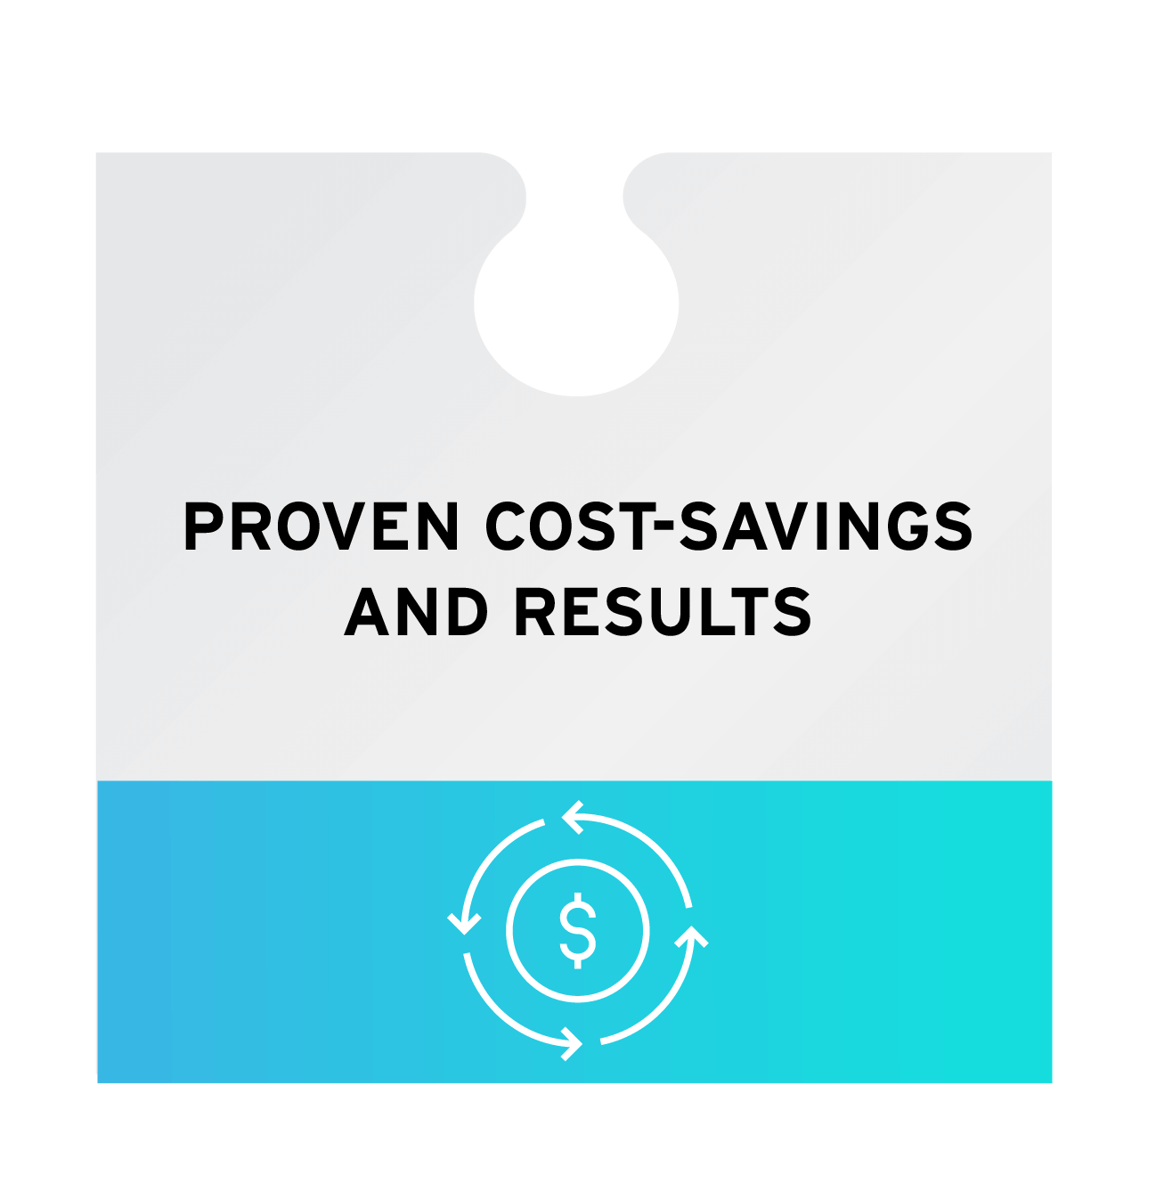 Proven cost-savings and results